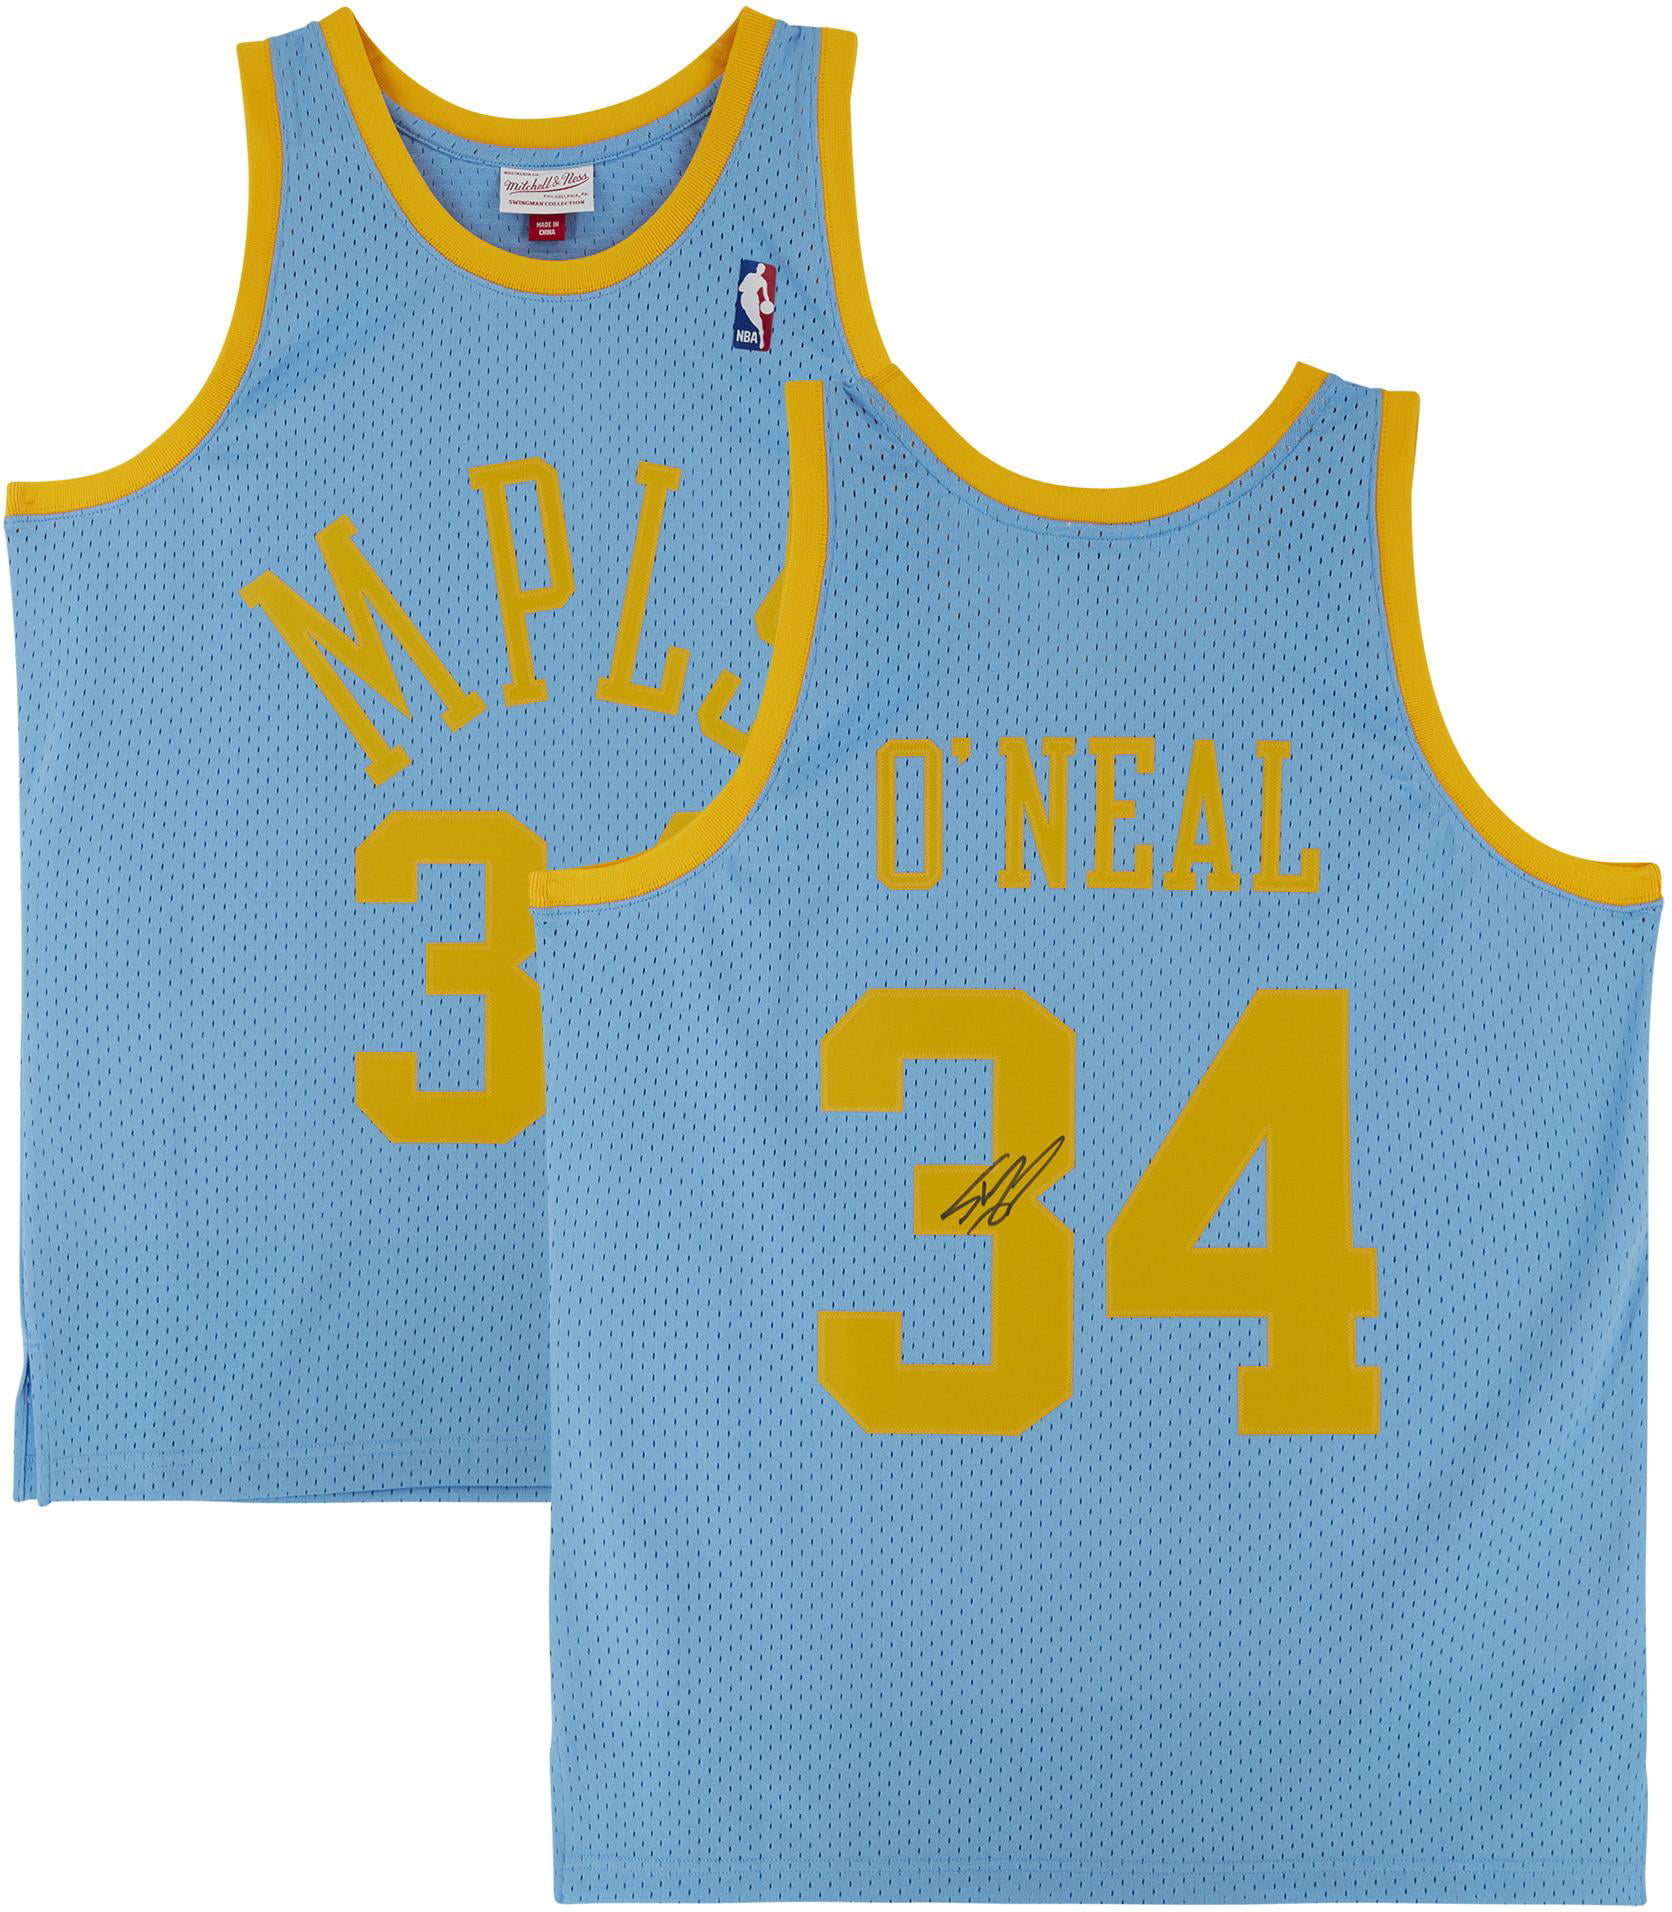 Fanatics Authentic Framed Shaquille O'Neal Los Angeles Lakers Autographed Mitchell & Ness Light Blue 2001-2002 Swingman Jersey